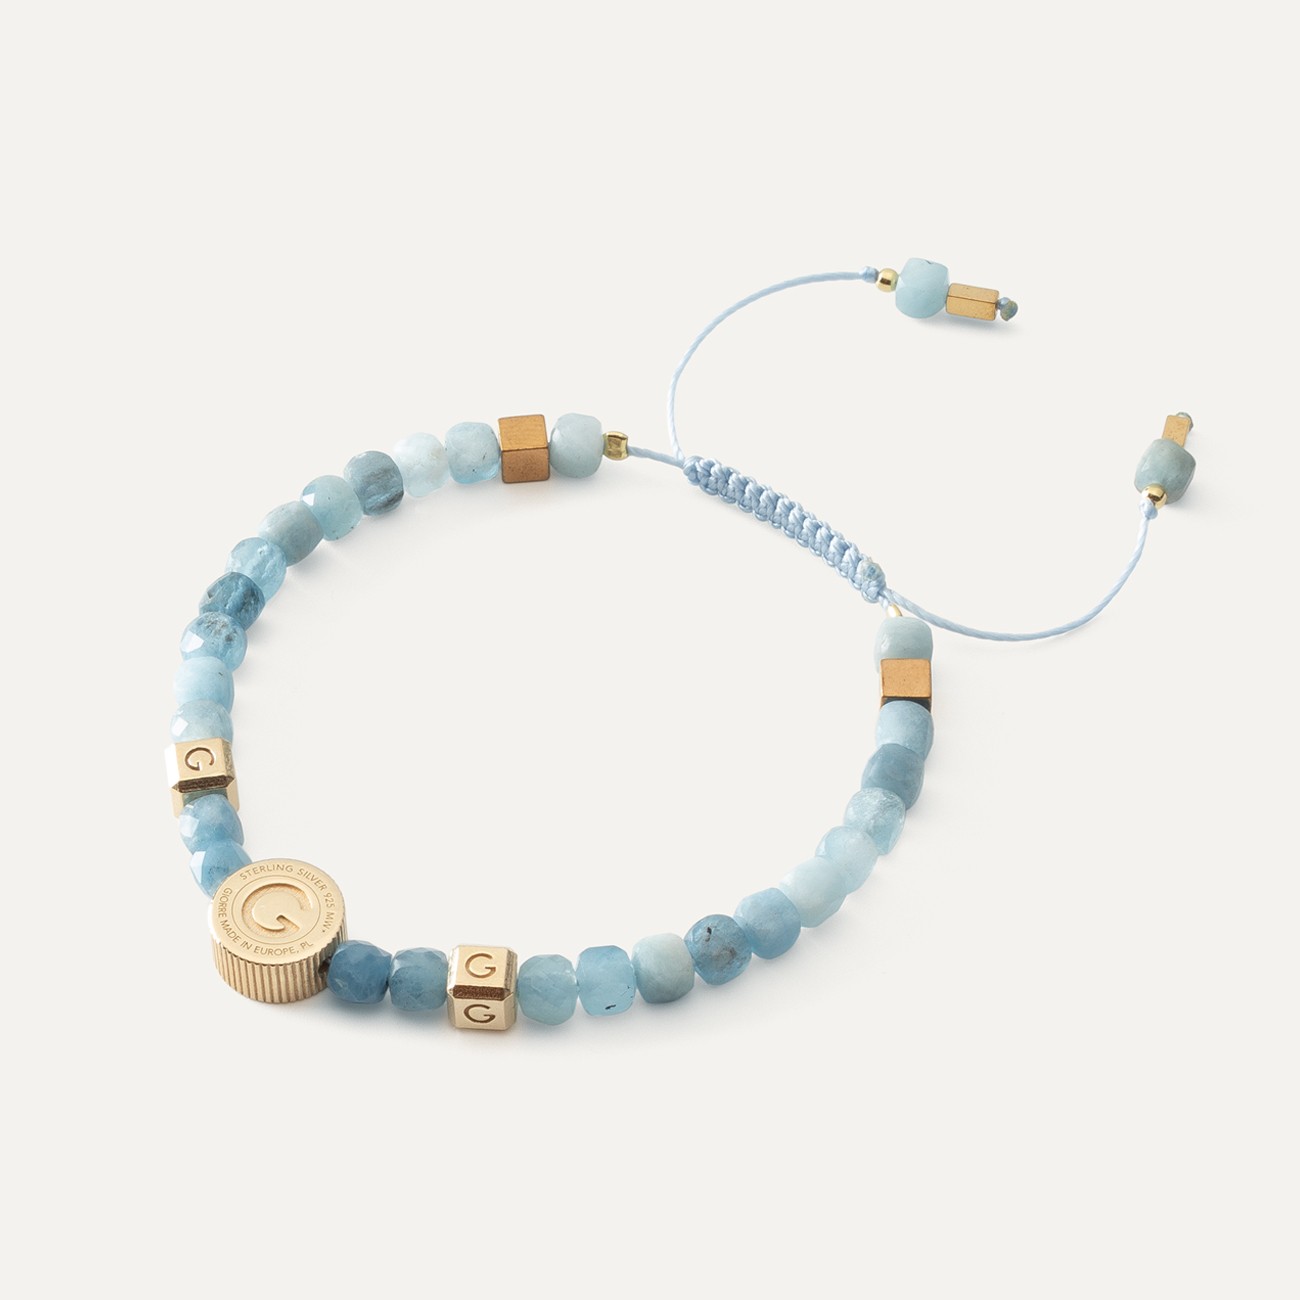 Bracelet with aquamarine, sterling silver 925 gold plated